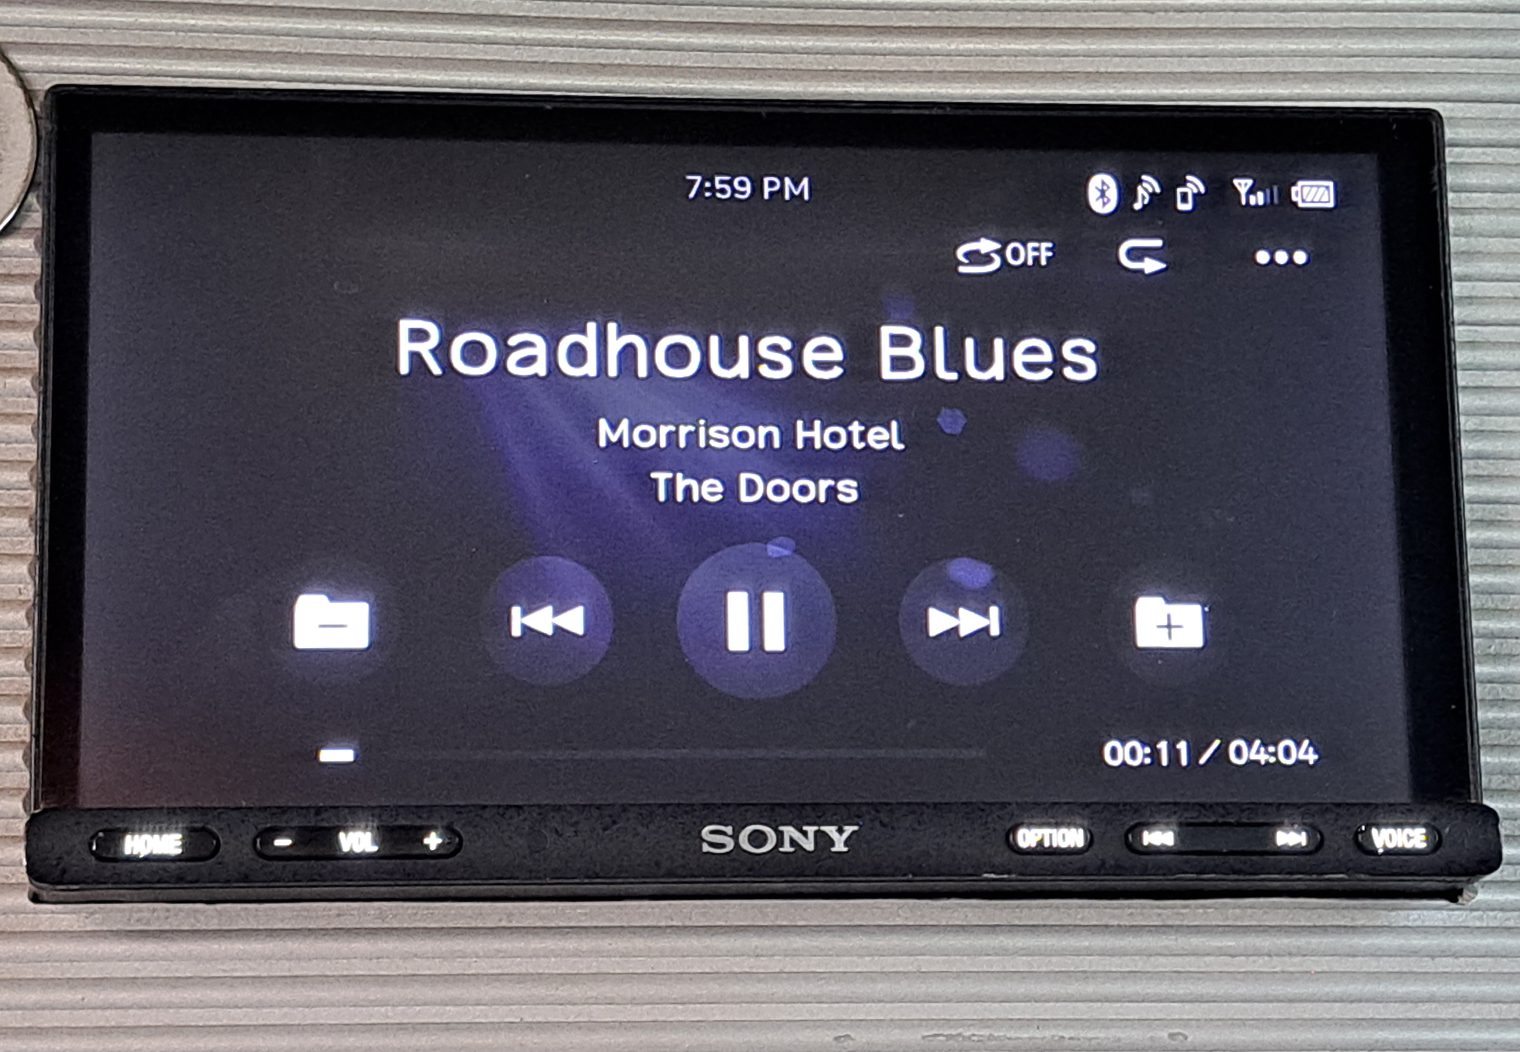 Music Via BT not Android Auto